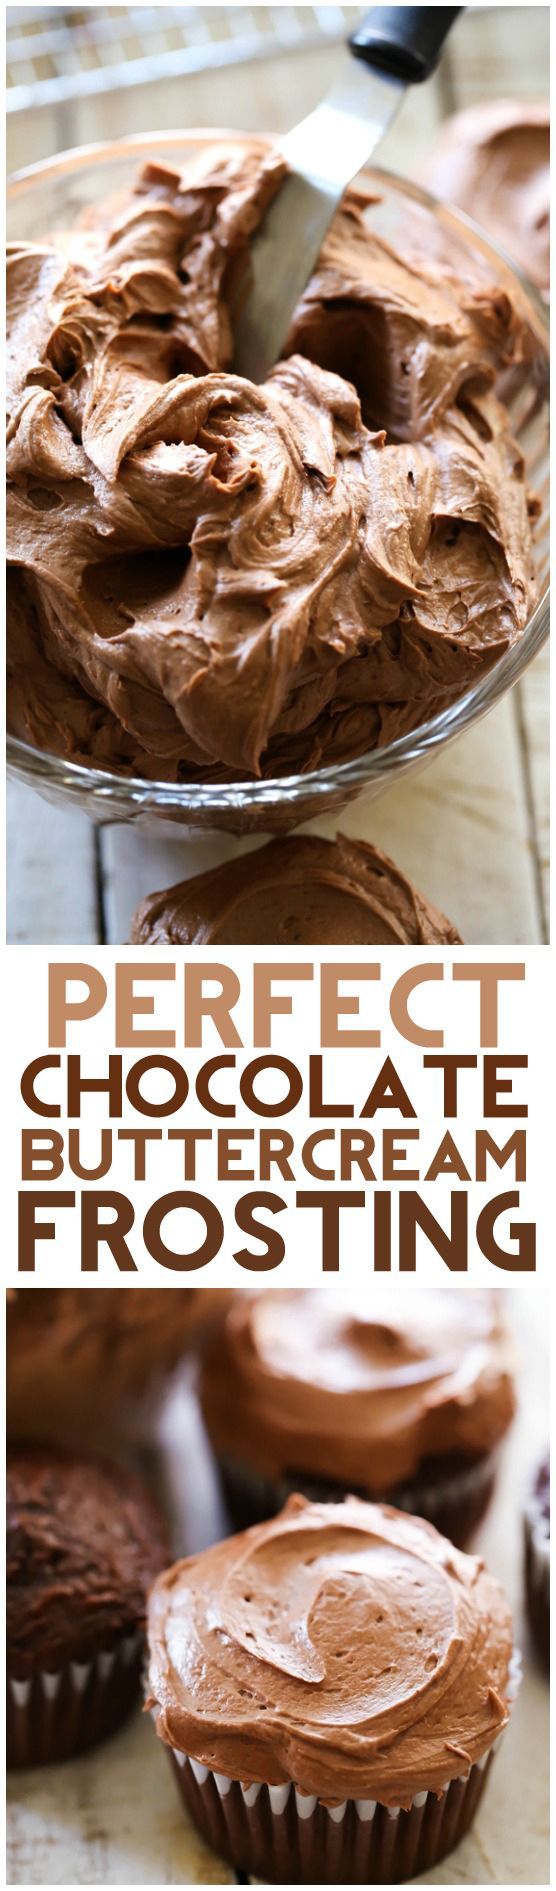 This Chocolate Buttercream is perfection! It is light and fluffy and has the perfect chocolate touch! It is my go-to chocolate